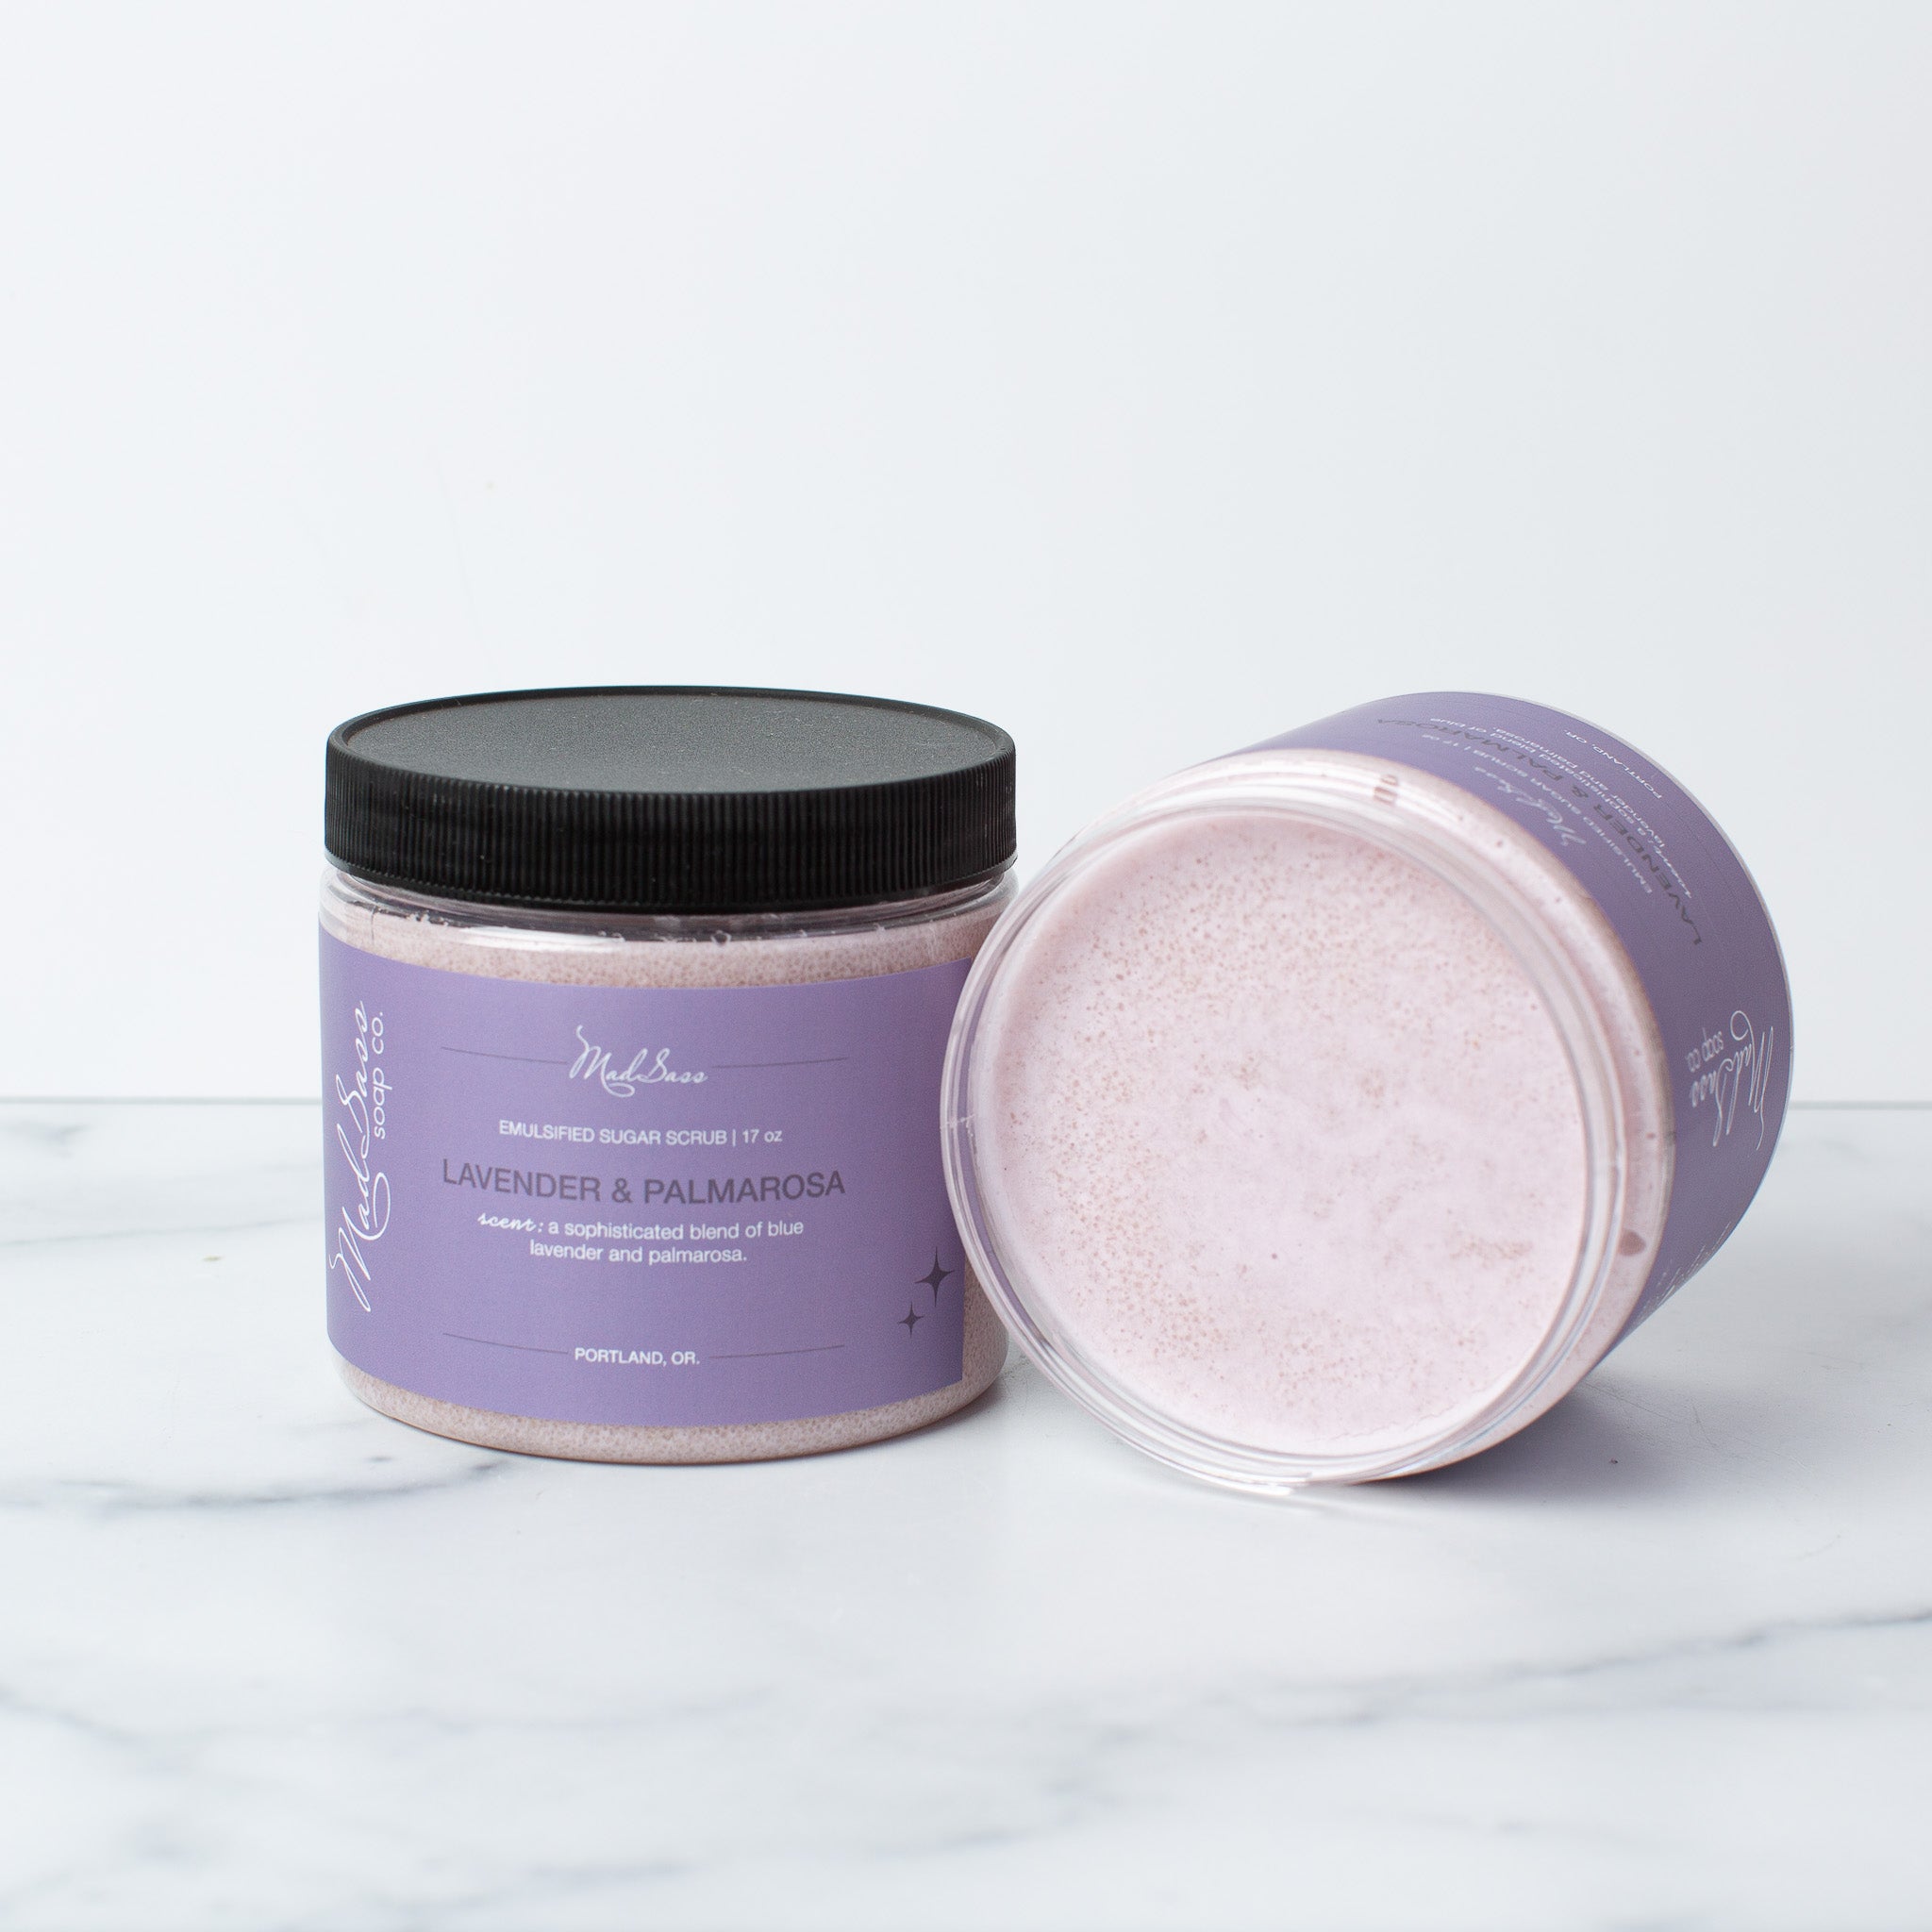 Two Lavender & Palmarosa Emulsified Sugar Scrubs, with one on its side, on a white background.